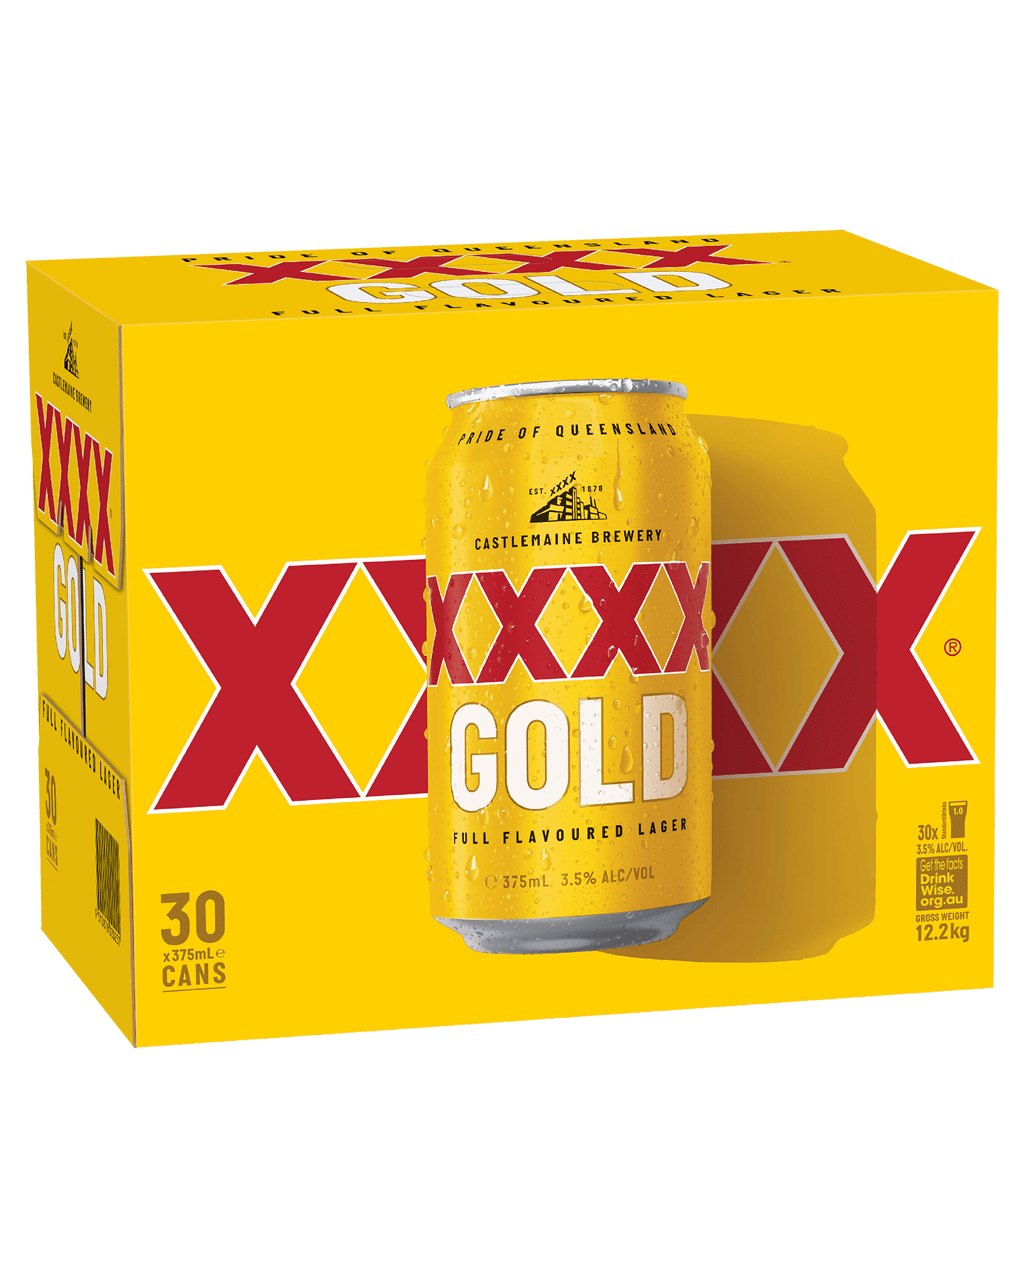 Forex gold beer bottle tradaxa forex trading